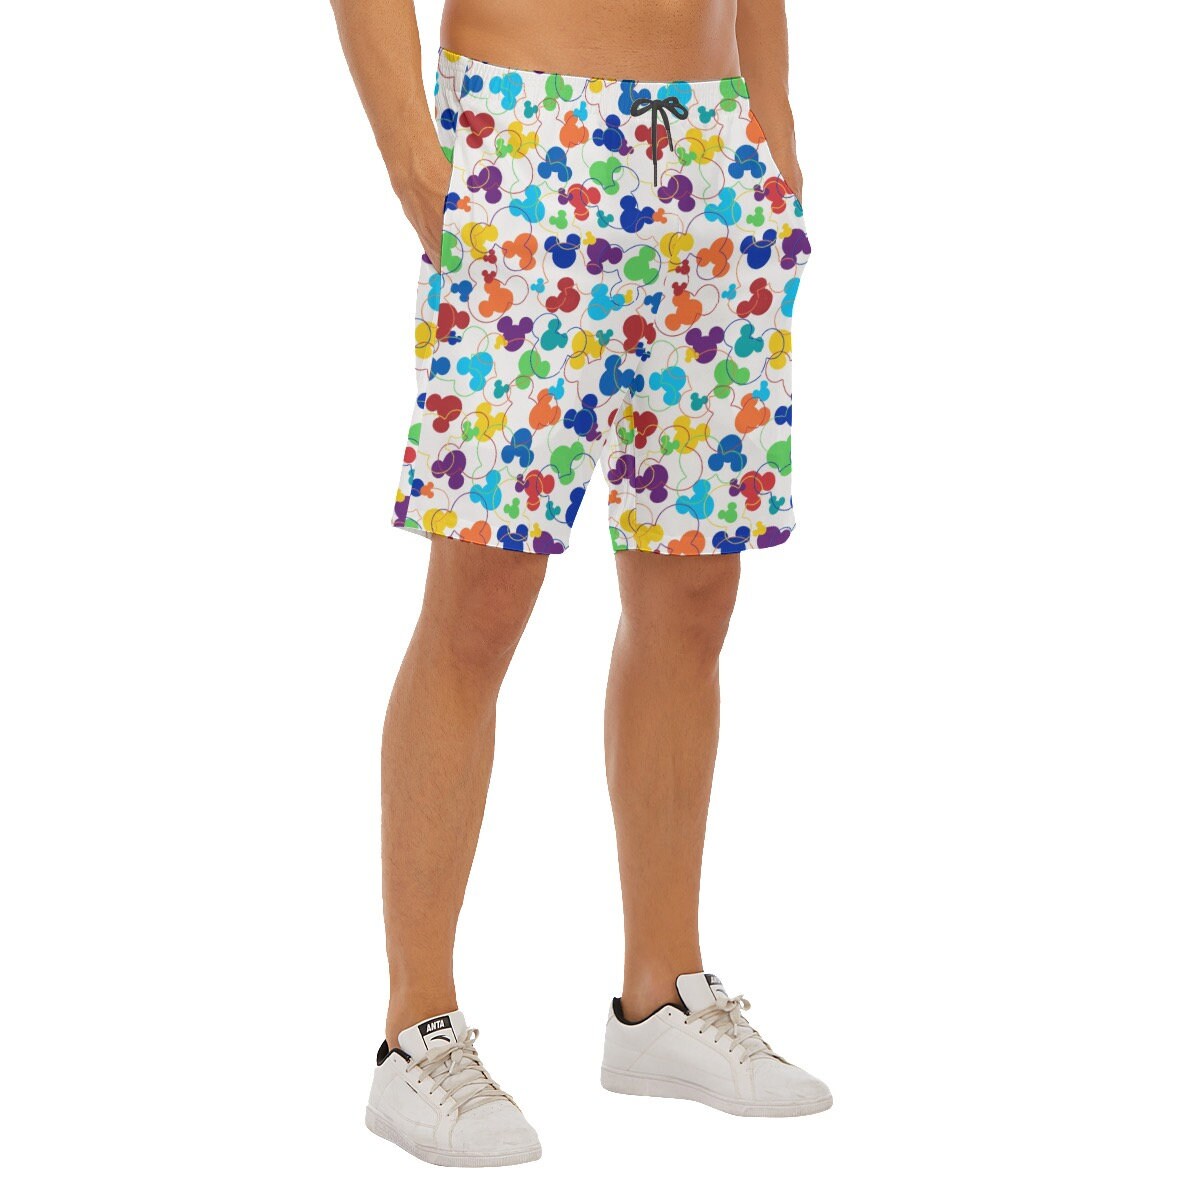 Disney Mickey Multicolor Rainbow Men's Beach Shorts , trunks - Add Fun and Color to Your Beach Look